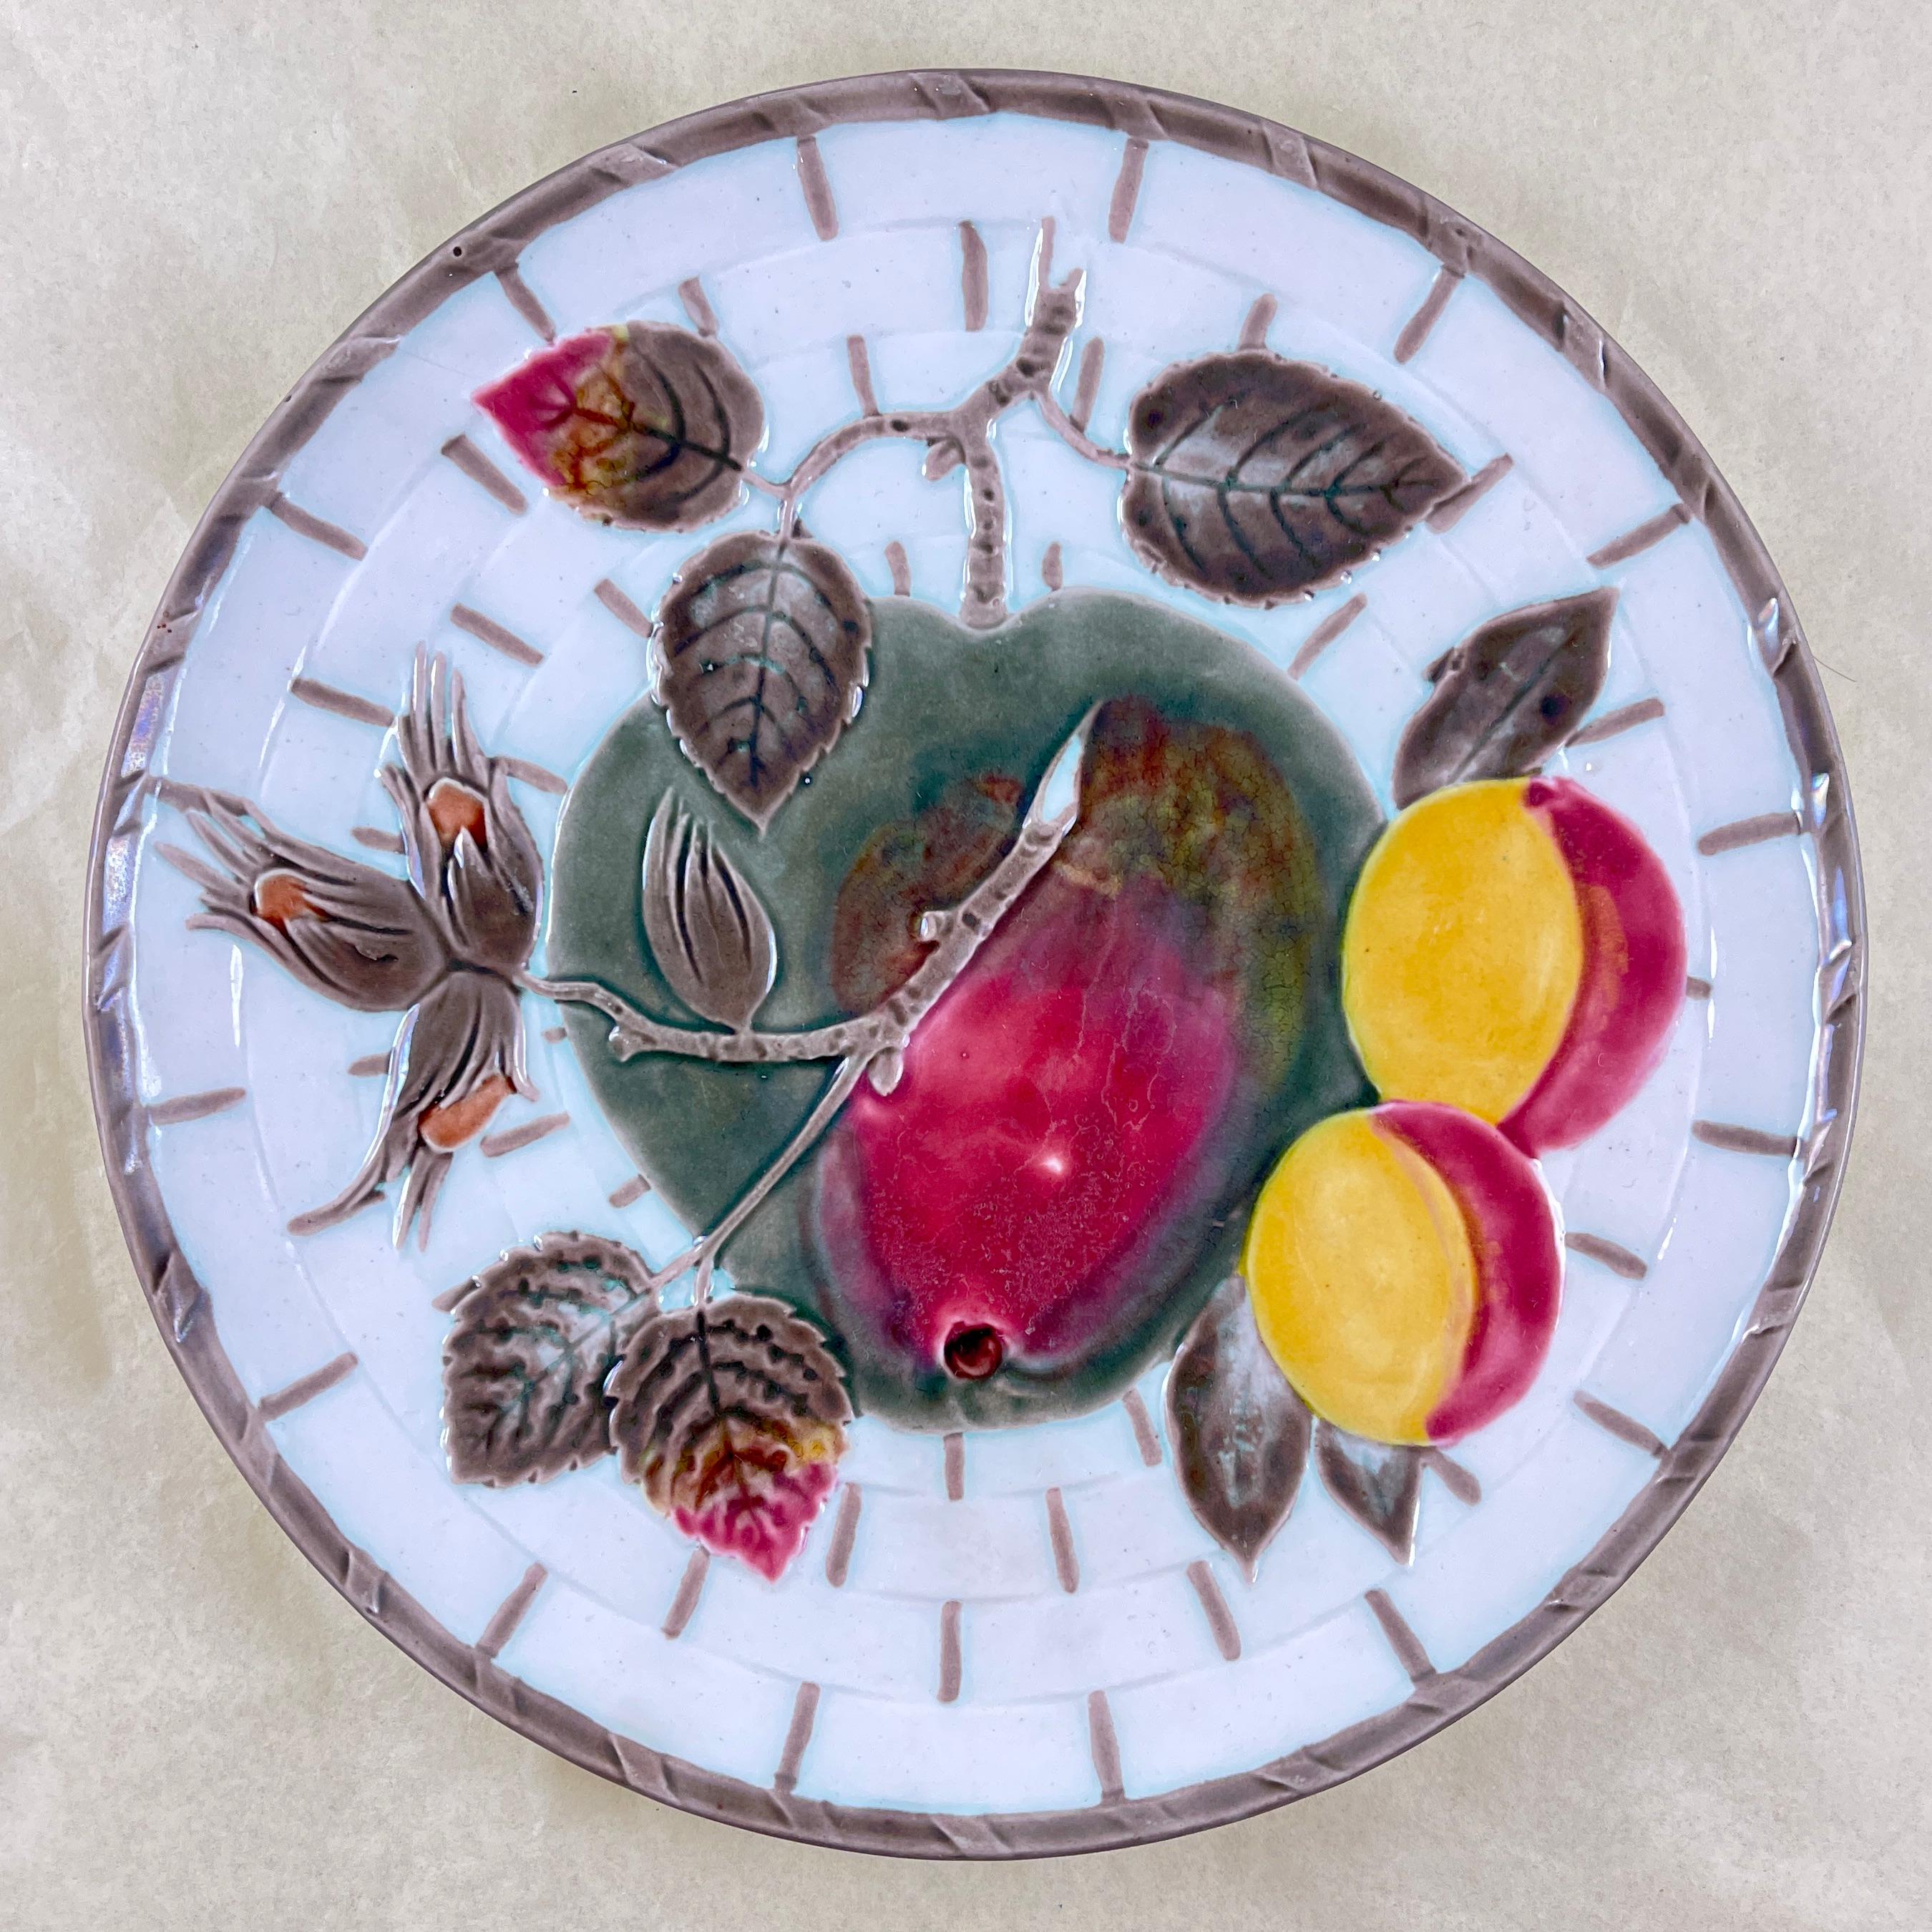 From Wedgwood and in the color way known as Argenta, a fruit plate, England, circa 1875.

Showing a central red and greenish apple and leaves along with a branch of apricots and hazelnuts, all on a white basket weave ground. The basket is bound at